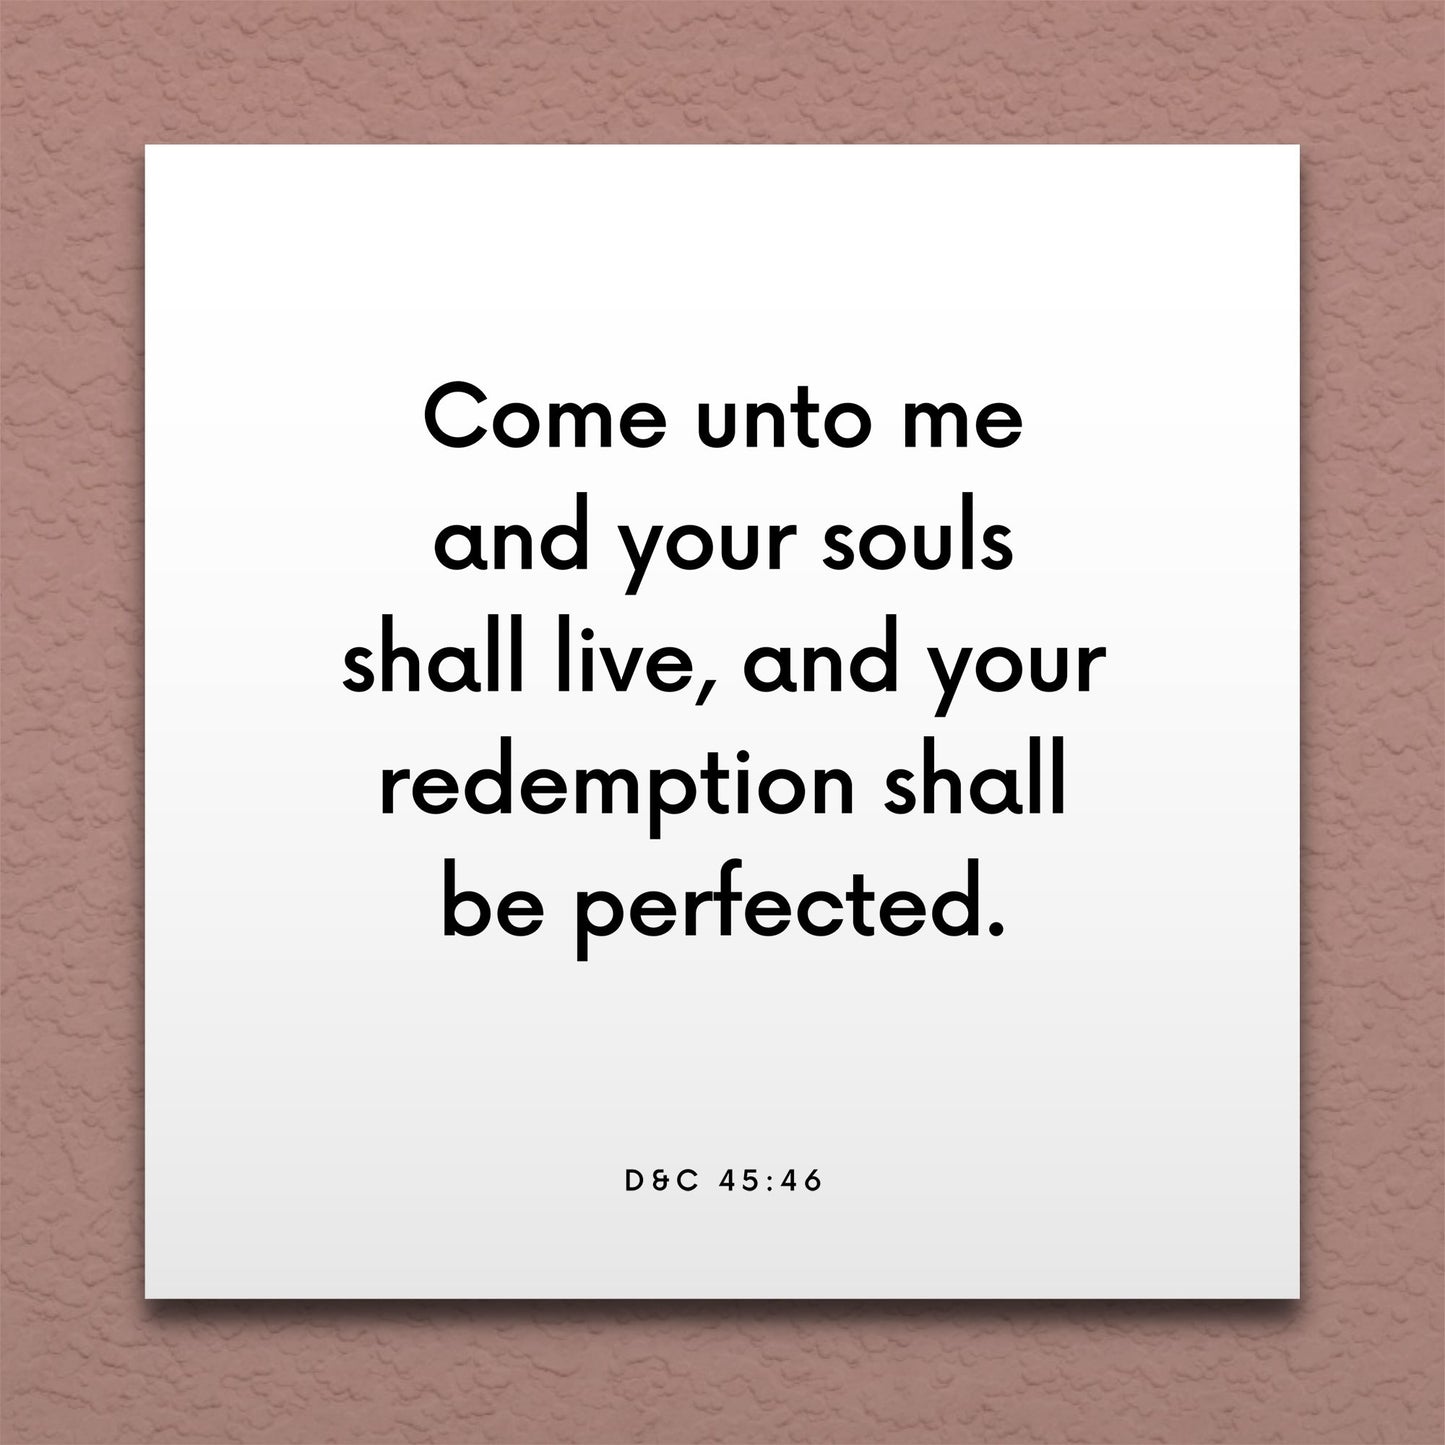 Wall-mounted scripture tile for D&C 45:46 - "Come unto me and your souls shall live"